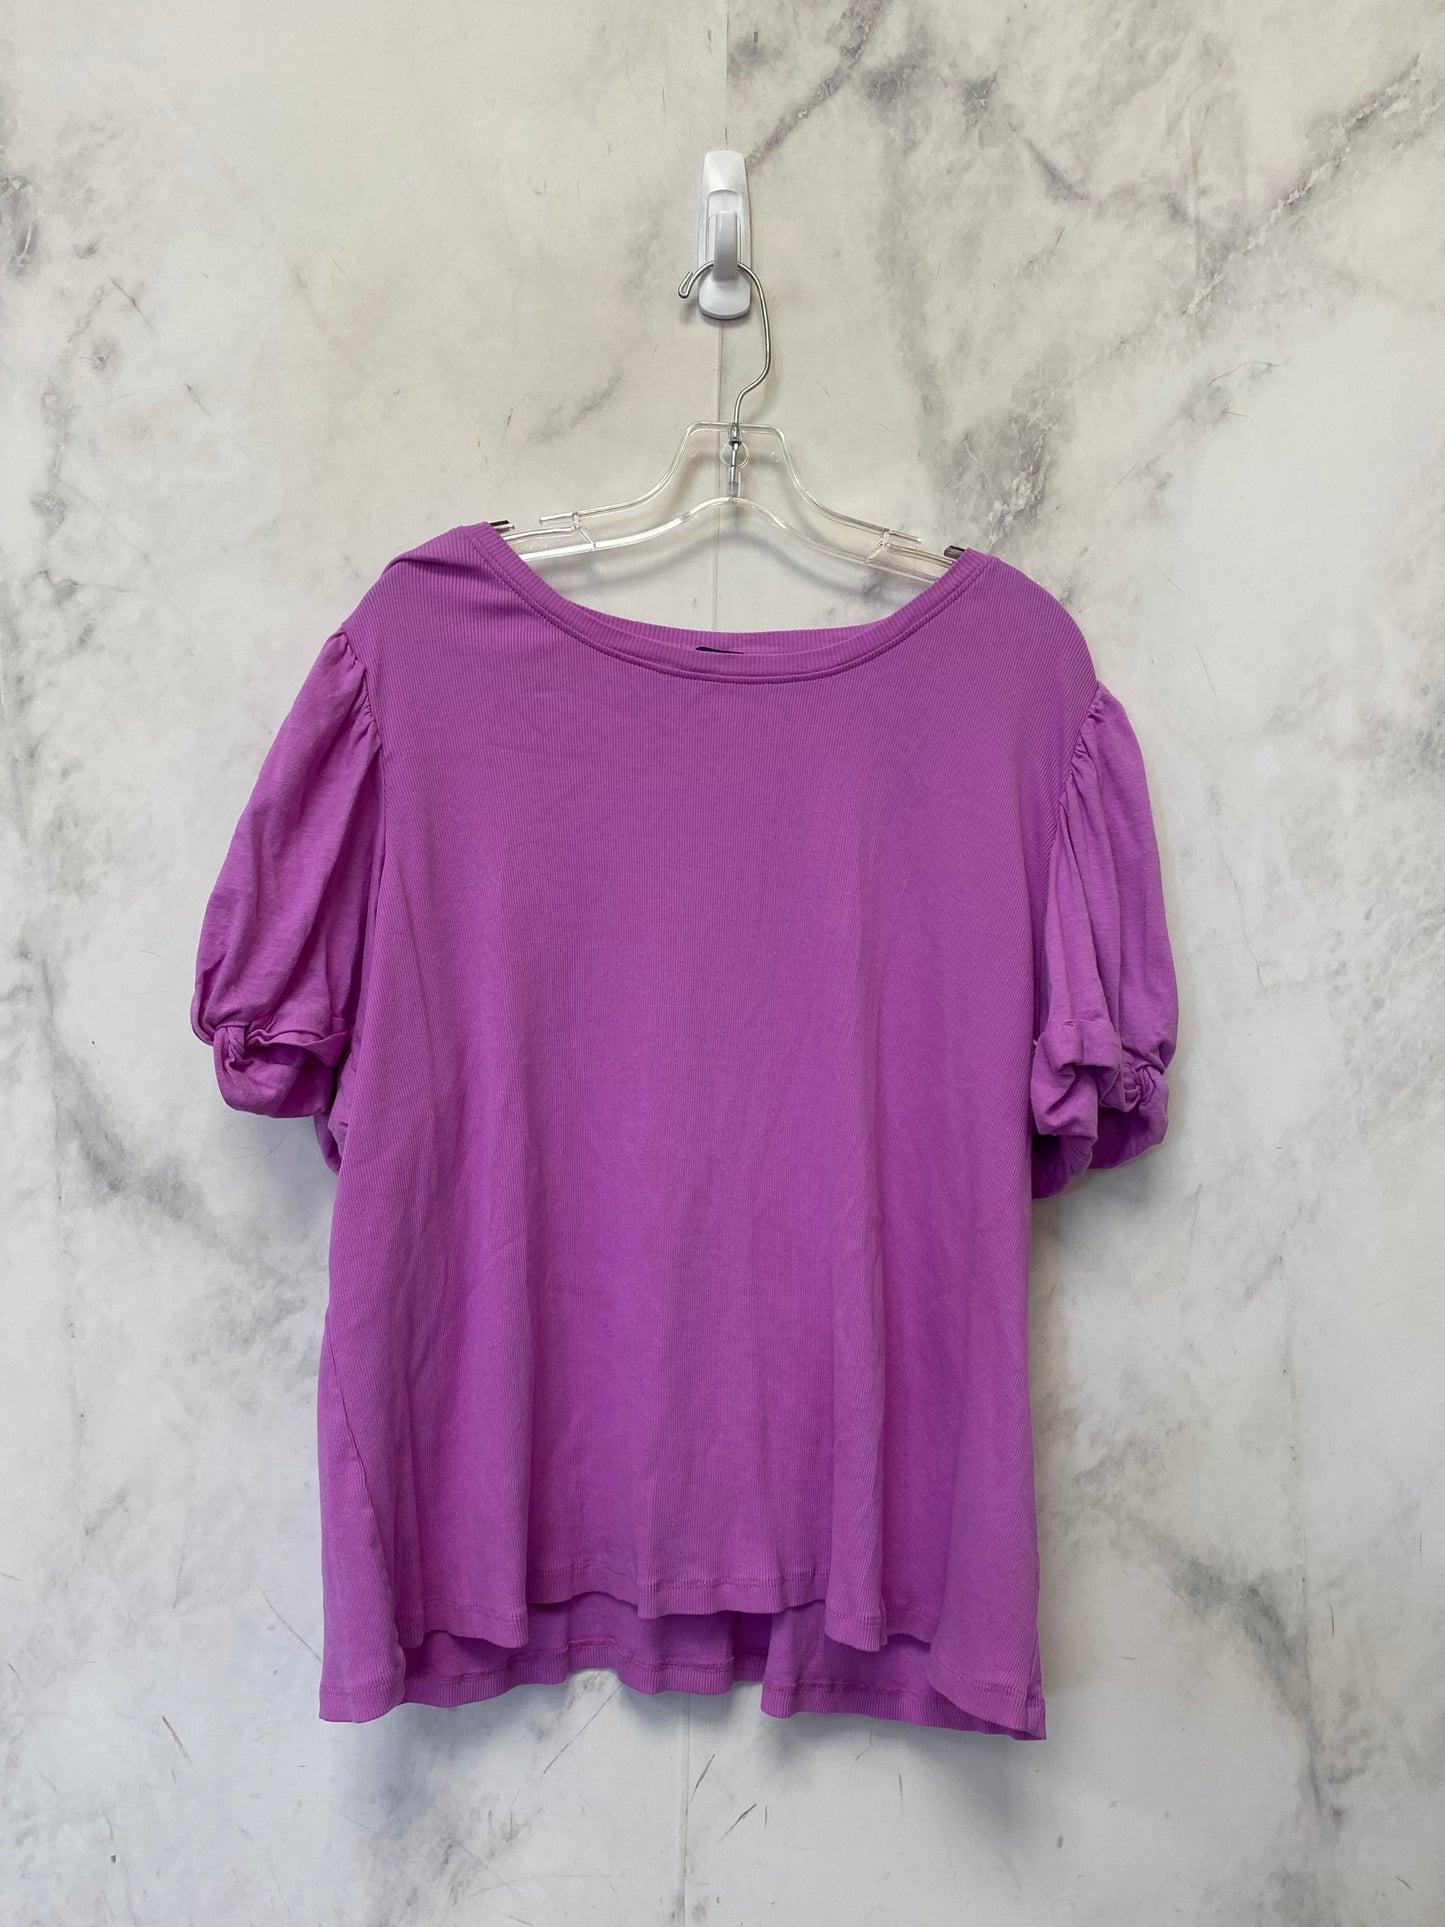 Top Short Sleeve Basic By 1.state  Size: 3x